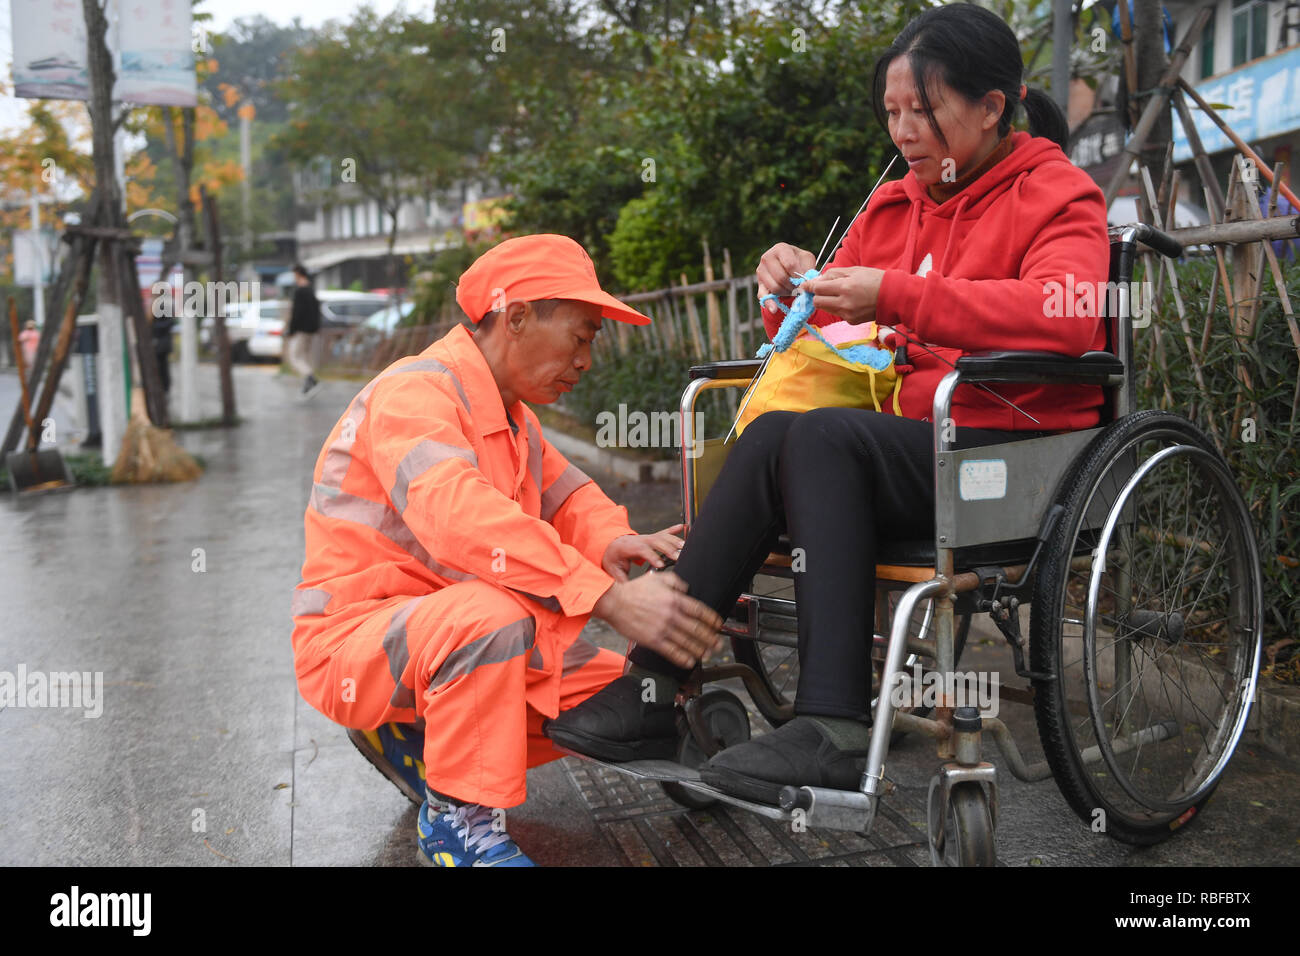 (190110) -- LONGYAN, Jan. 10, 2019 (Xinhua) -- Sanitation worker Dong Jidong helps relax his wife  Dong Jinxiang's legs during work break in Xinluo District of Longyan City, southeast China's Fujian Province, Jan. 9, 2019. Due to femoral head necrosis disease, Dong Jinxiang has been living on a wheelchair for about a decade. To take care of his handicapped wife, Dong Jidong, who himself has been afflicted with ankylosing spondylitis, gave up his work in a cement plant and chose to clean the streets near their home two years ago just in order to take better care of his wife. Everyday, Dong Jido Stock Photo